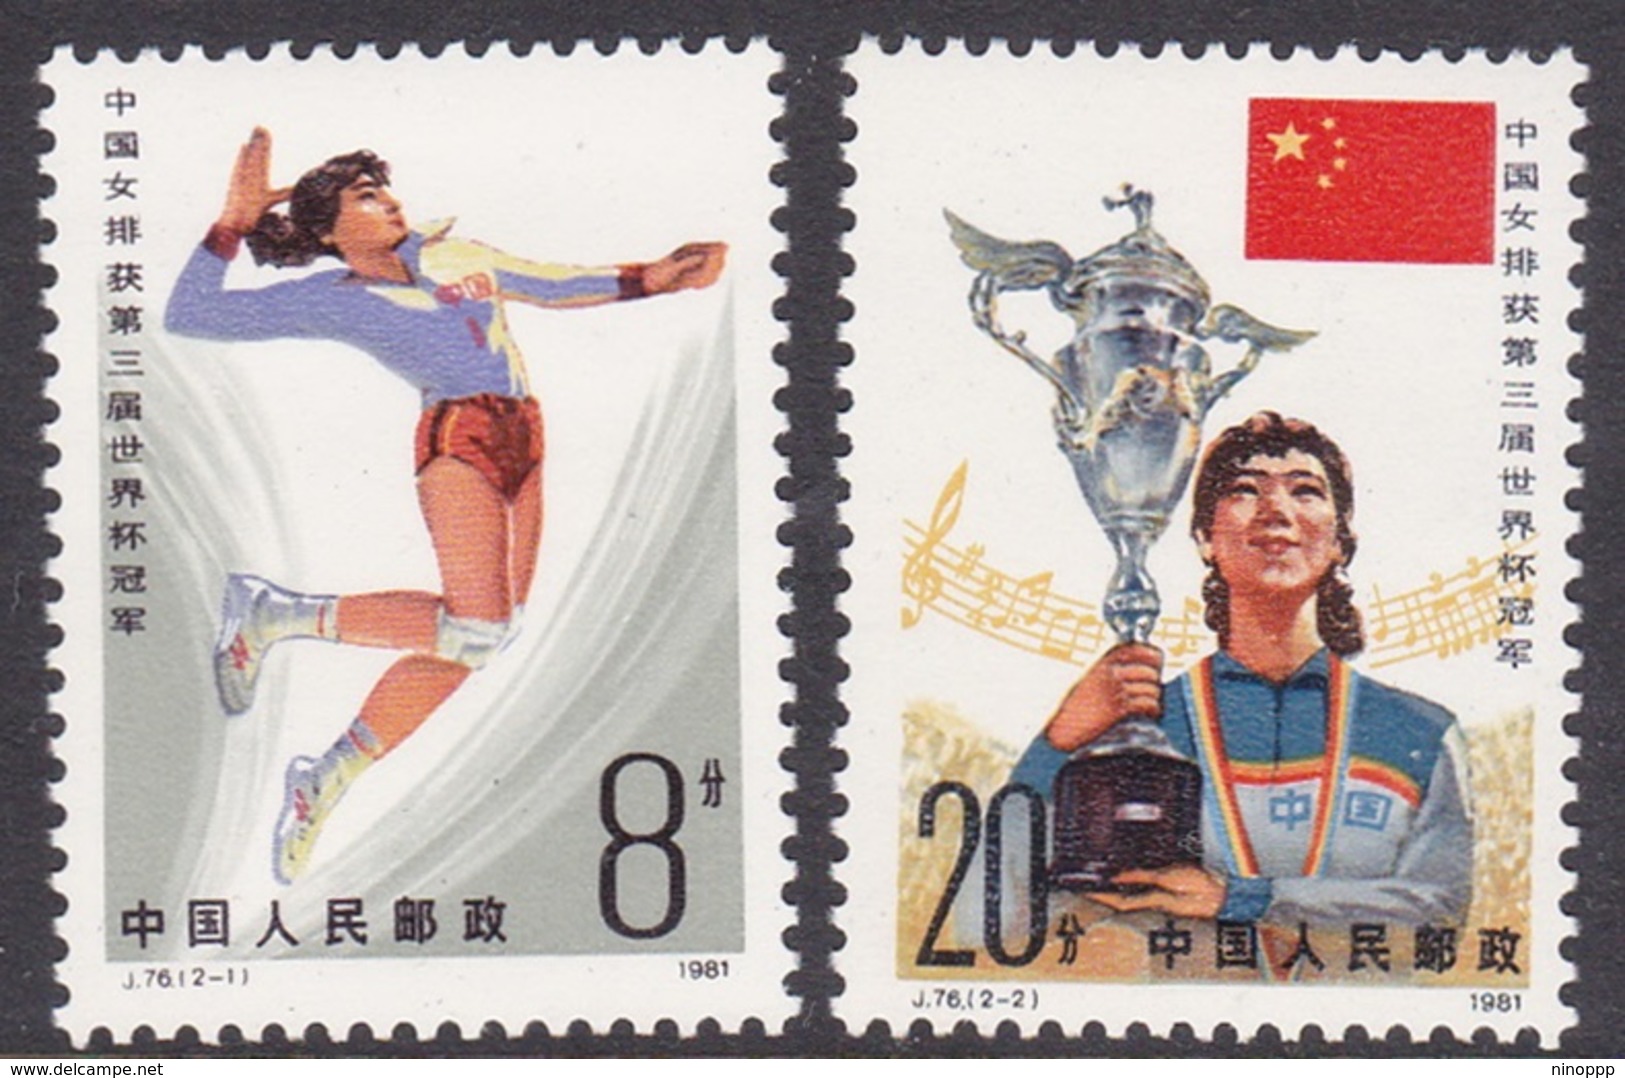 China People's Republic SG 3081-83 1981 Women's Team Victory In 3rd World Cup Volleyball Championship, Mint Never Hinged - Neufs